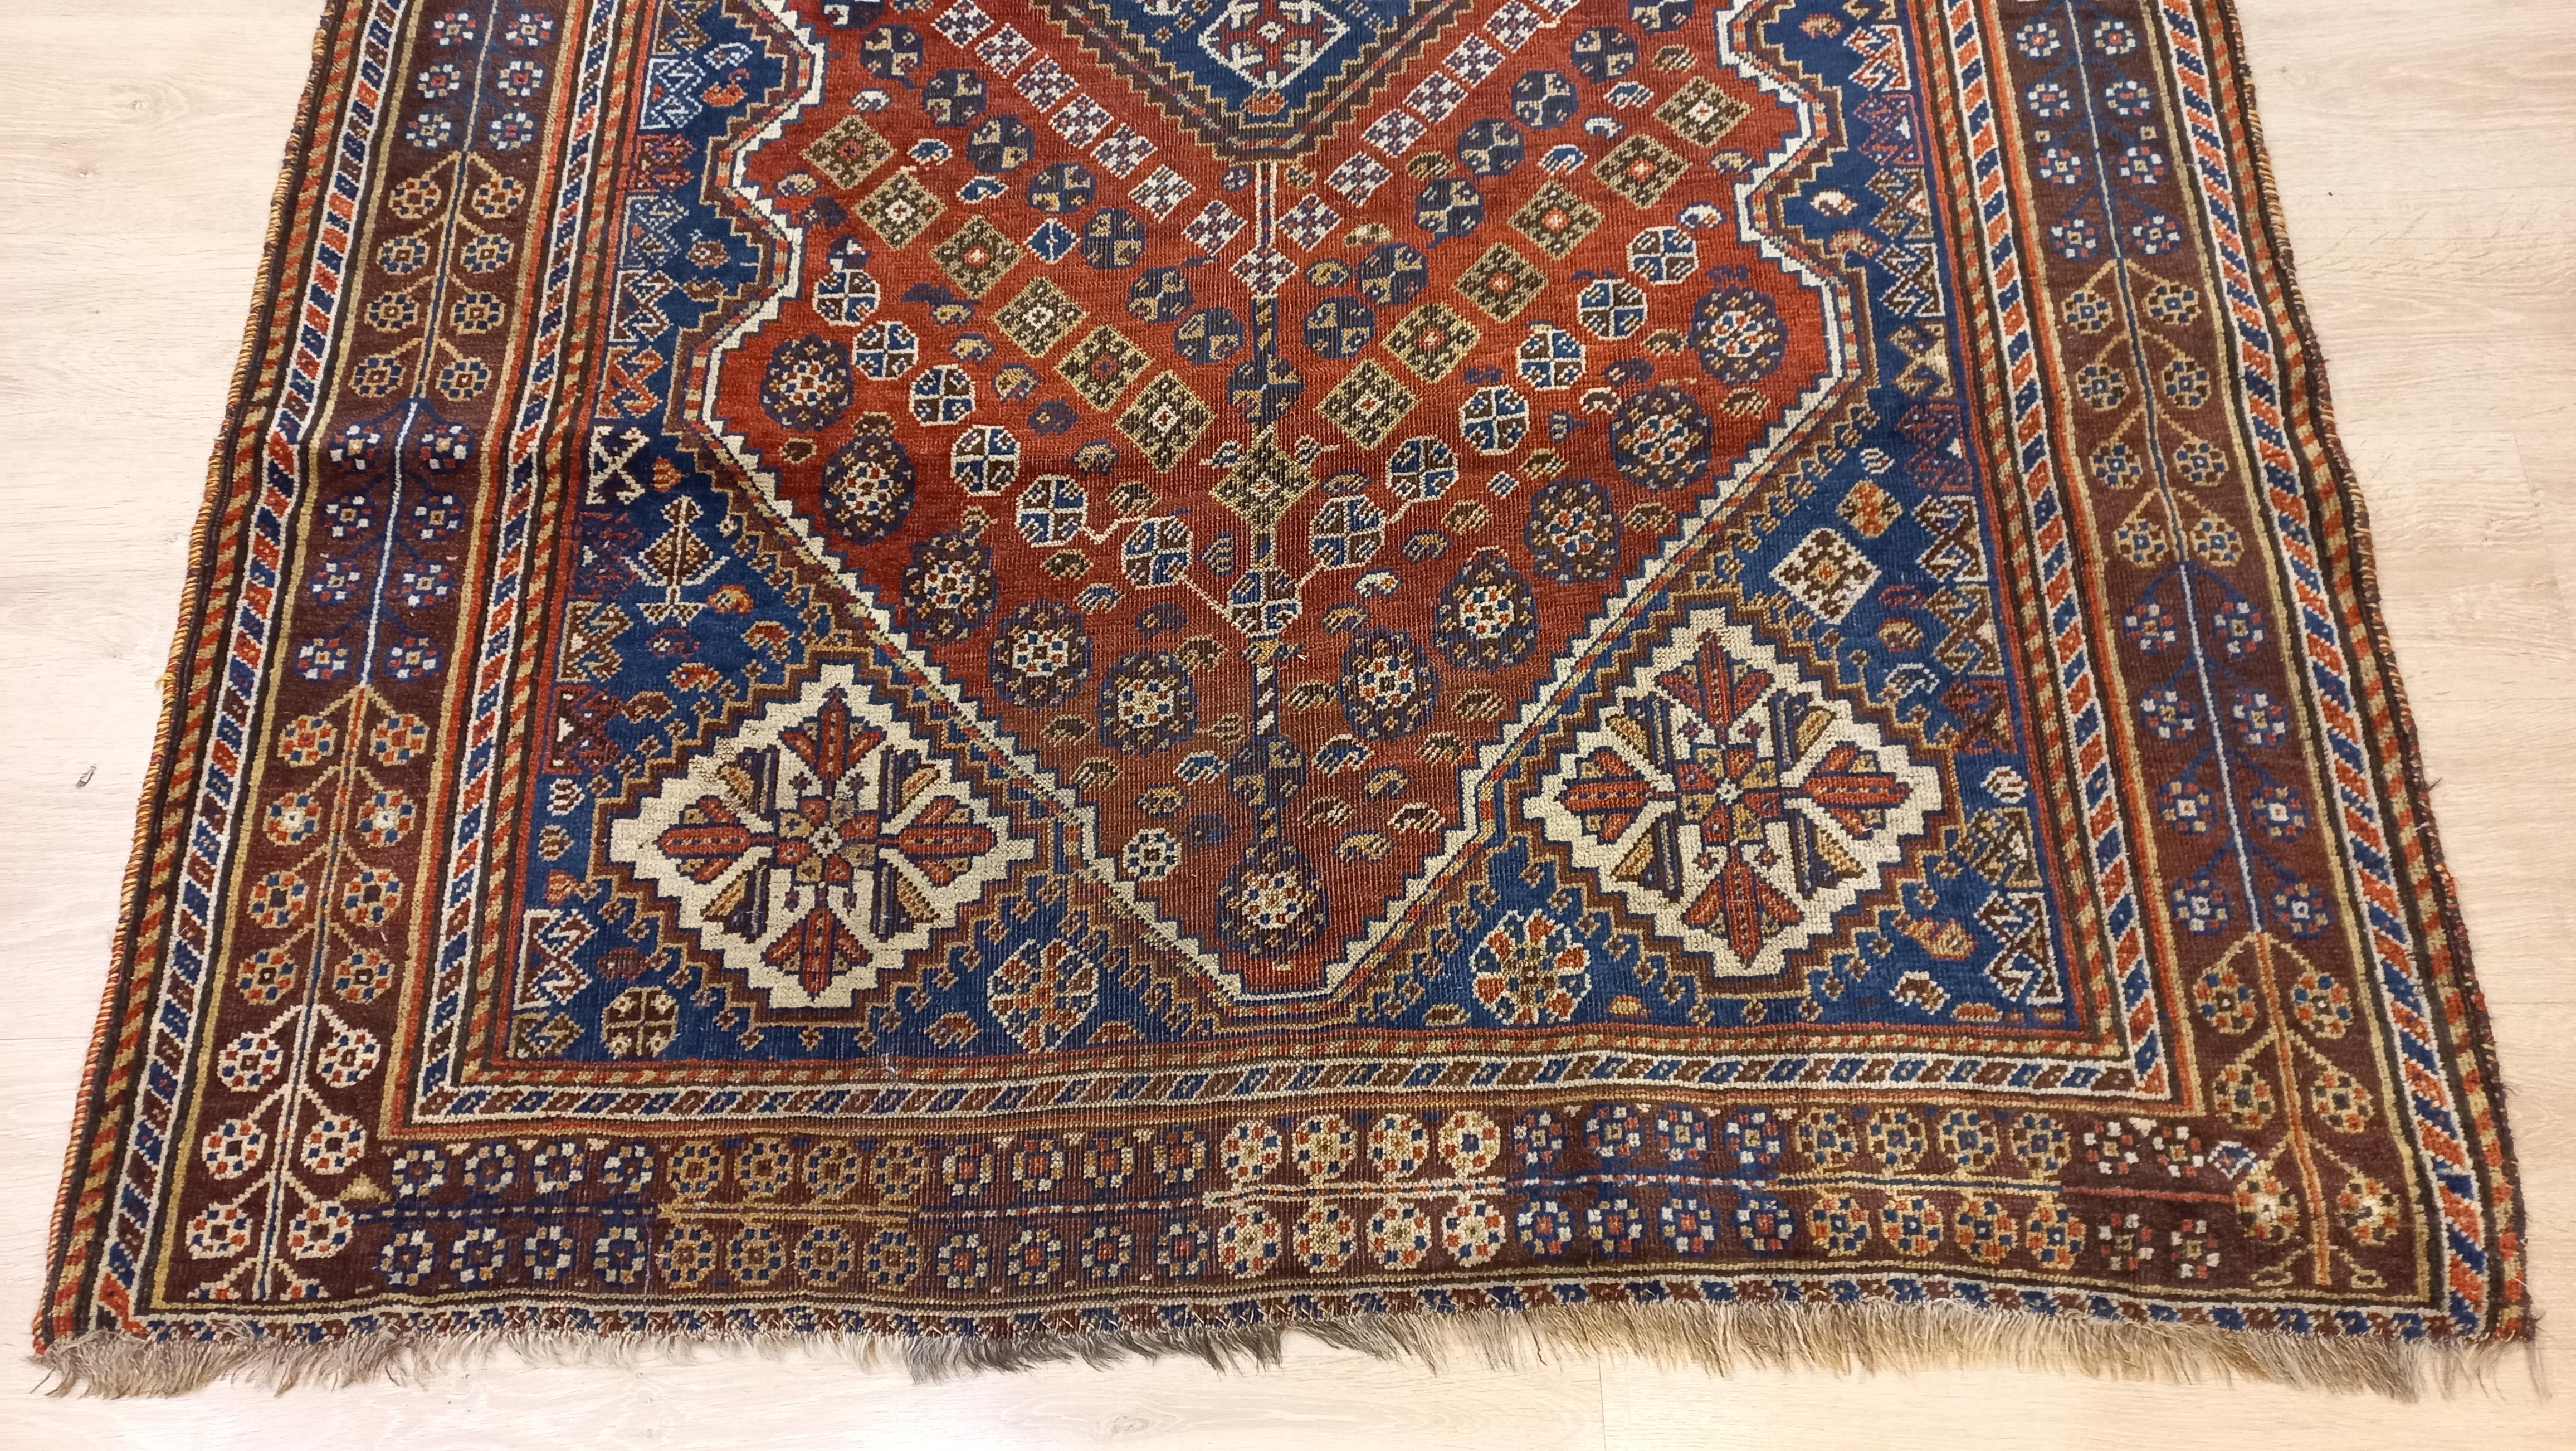 19th Century 4.6x6.6 Ft Antique Persian Shiraz Qashqai Rug. All Wool & Natural Vegetable Dyes For Sale